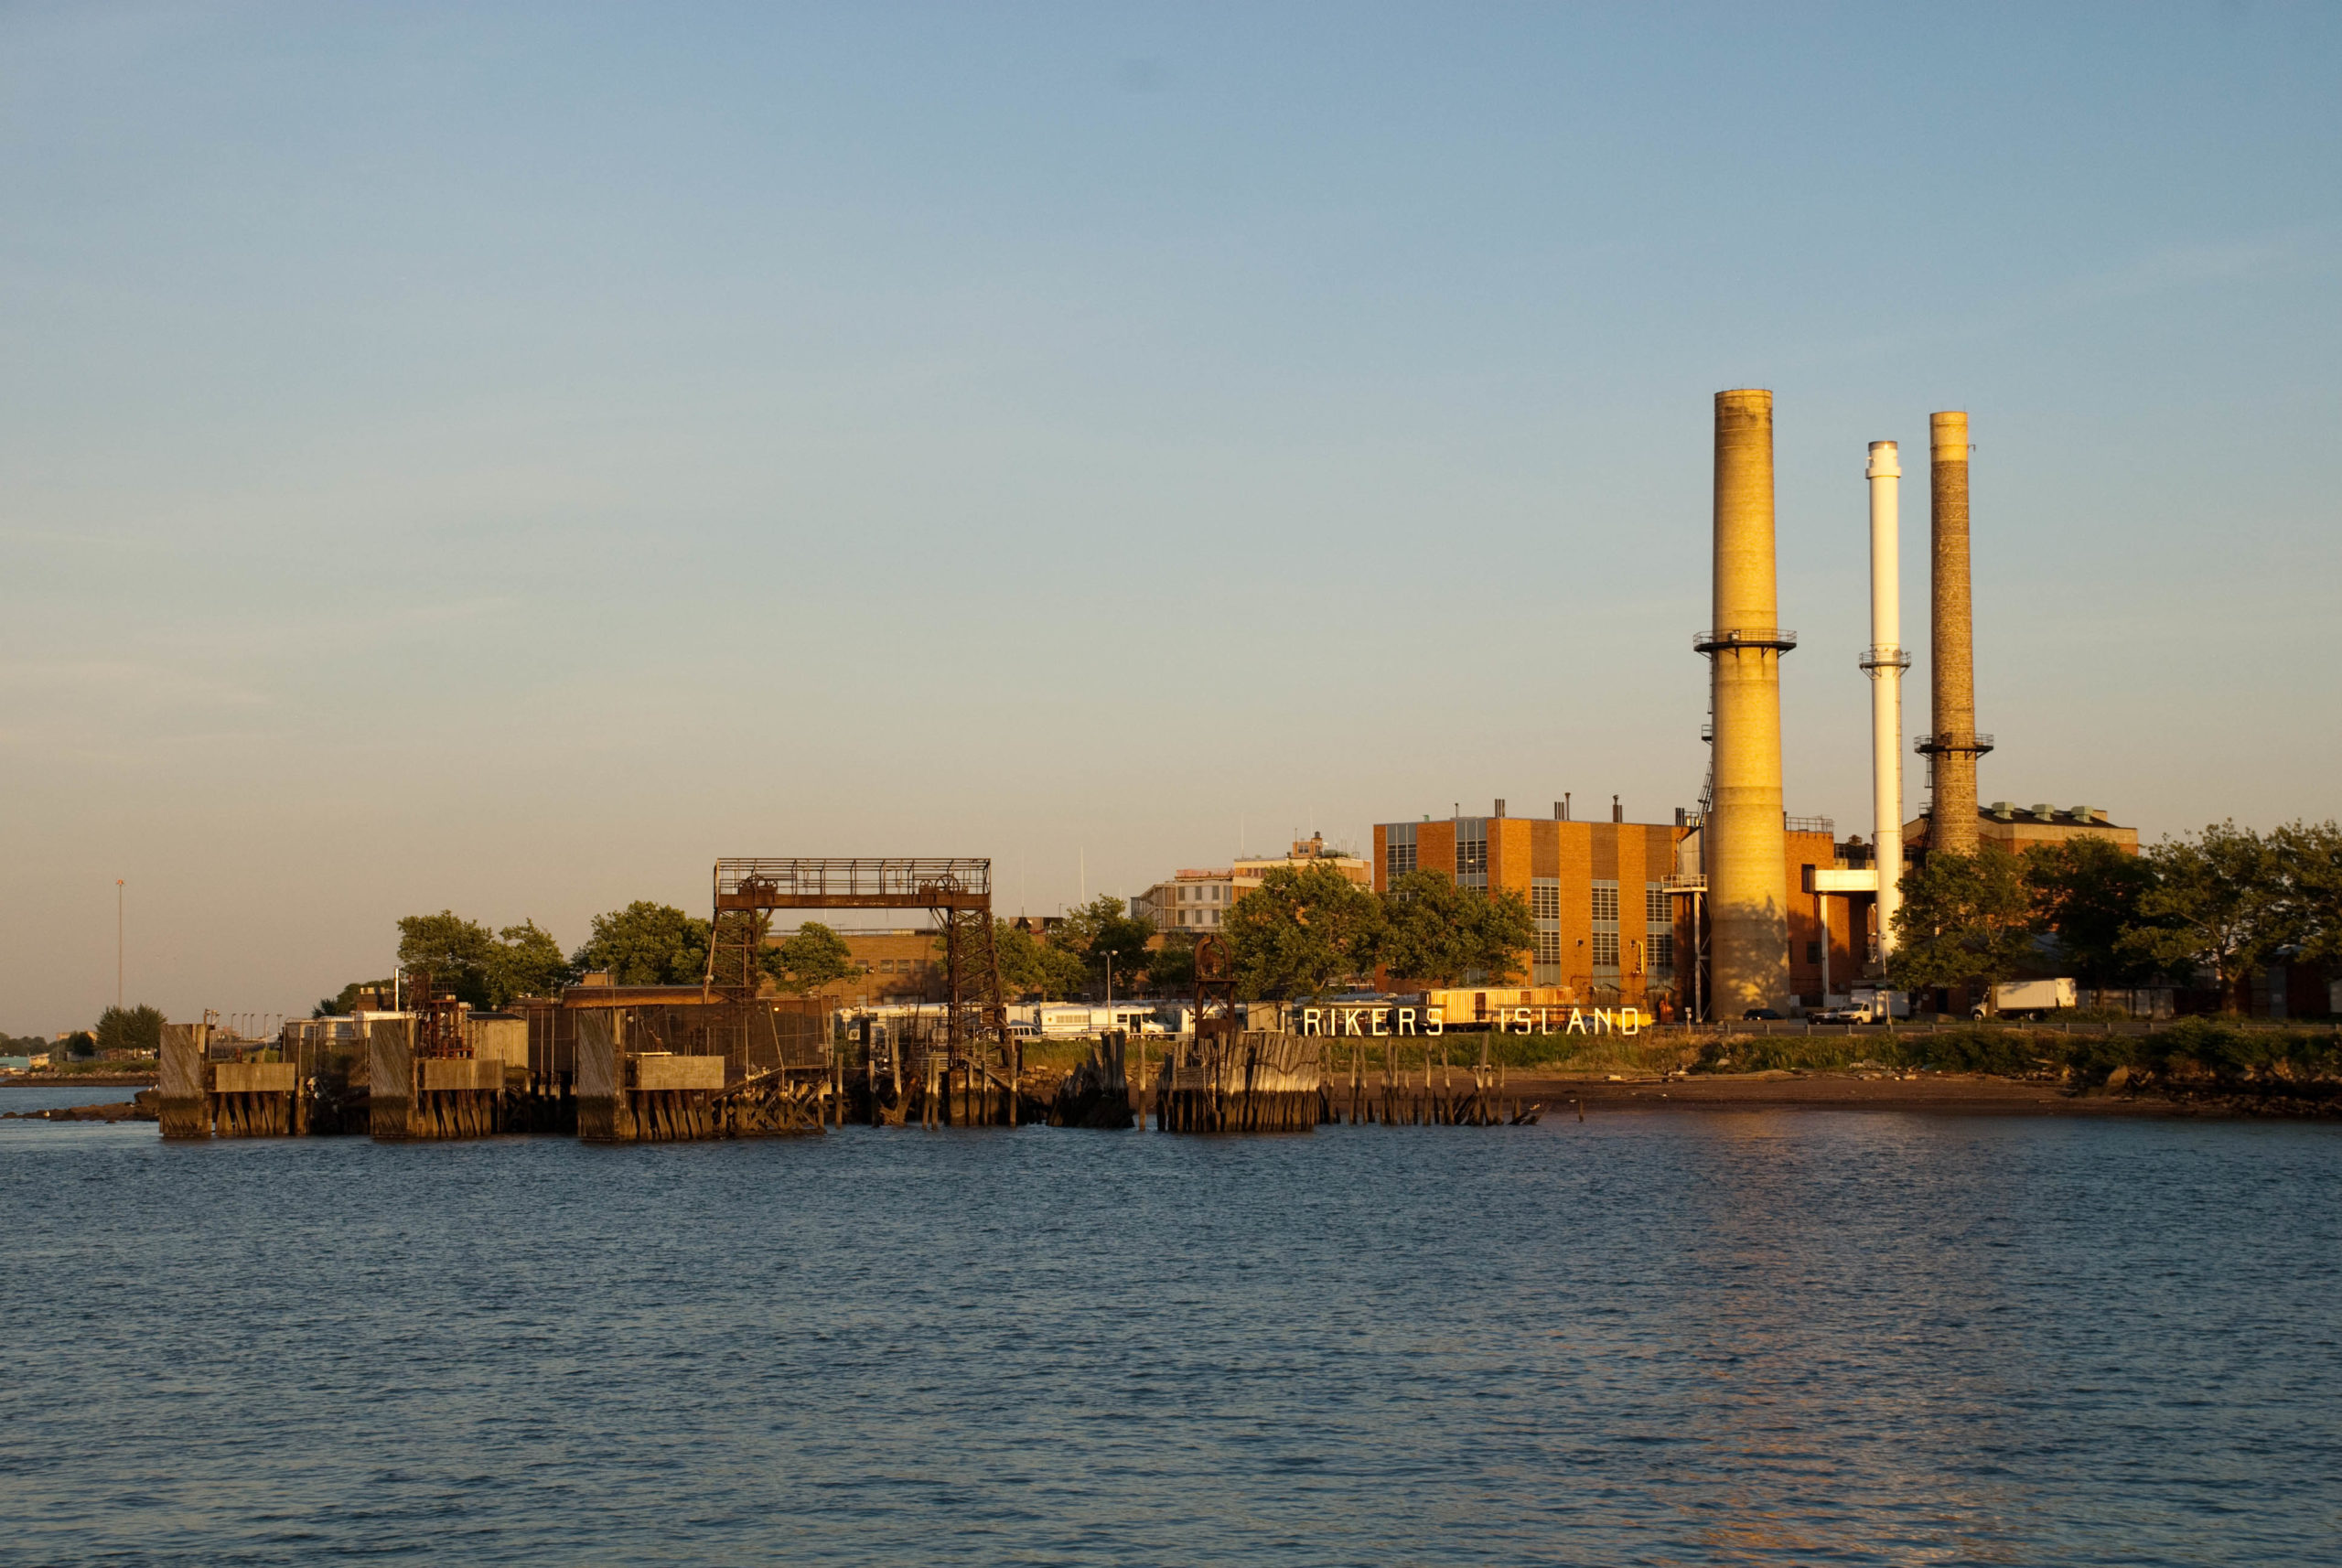 A Case for Reparations and Environmental Remediation on Rikers Island